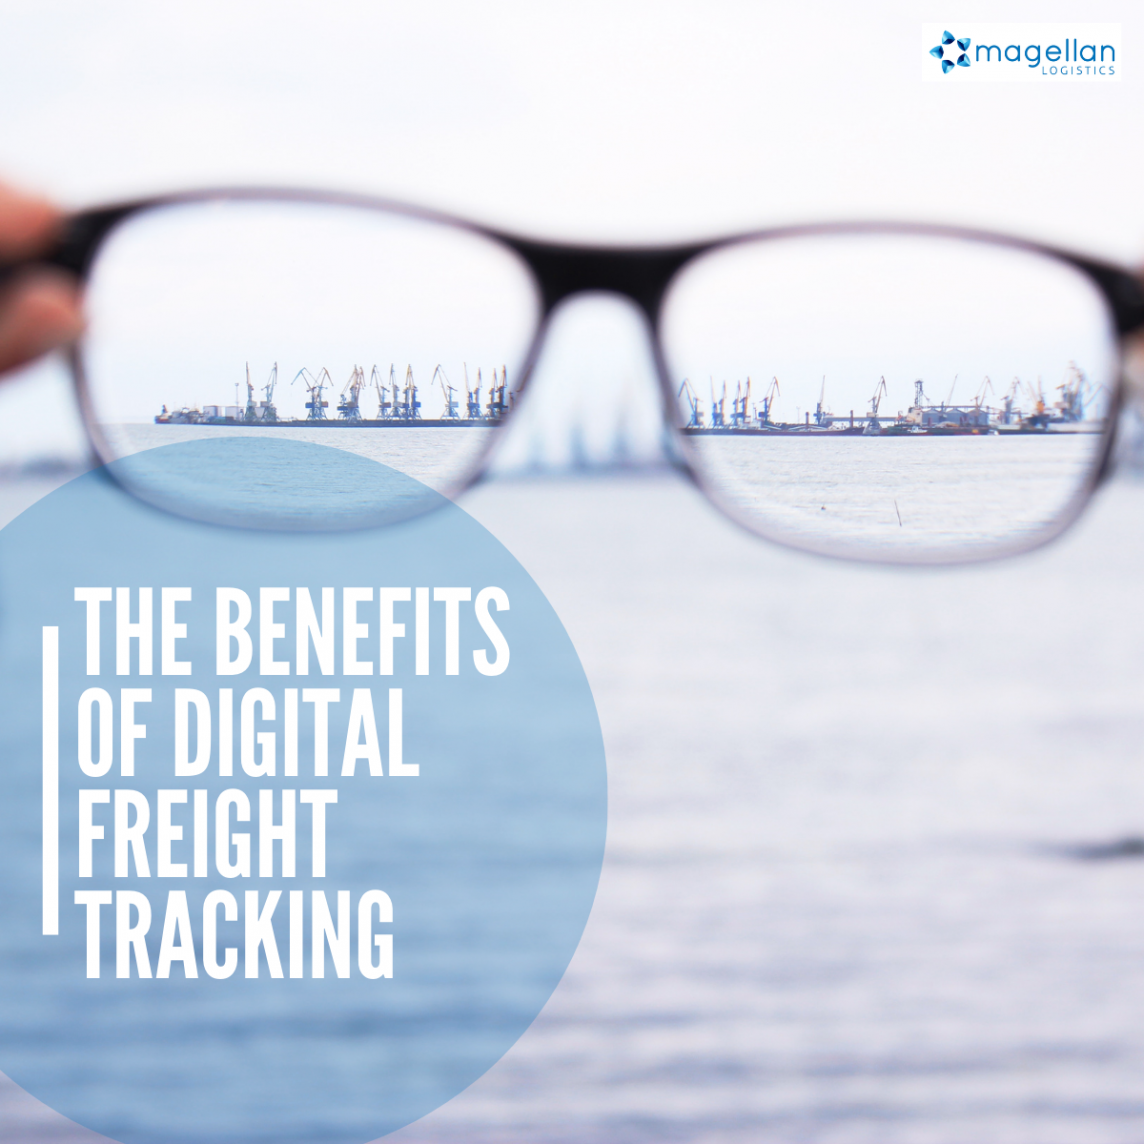 Digital freight tracking: The Benefits